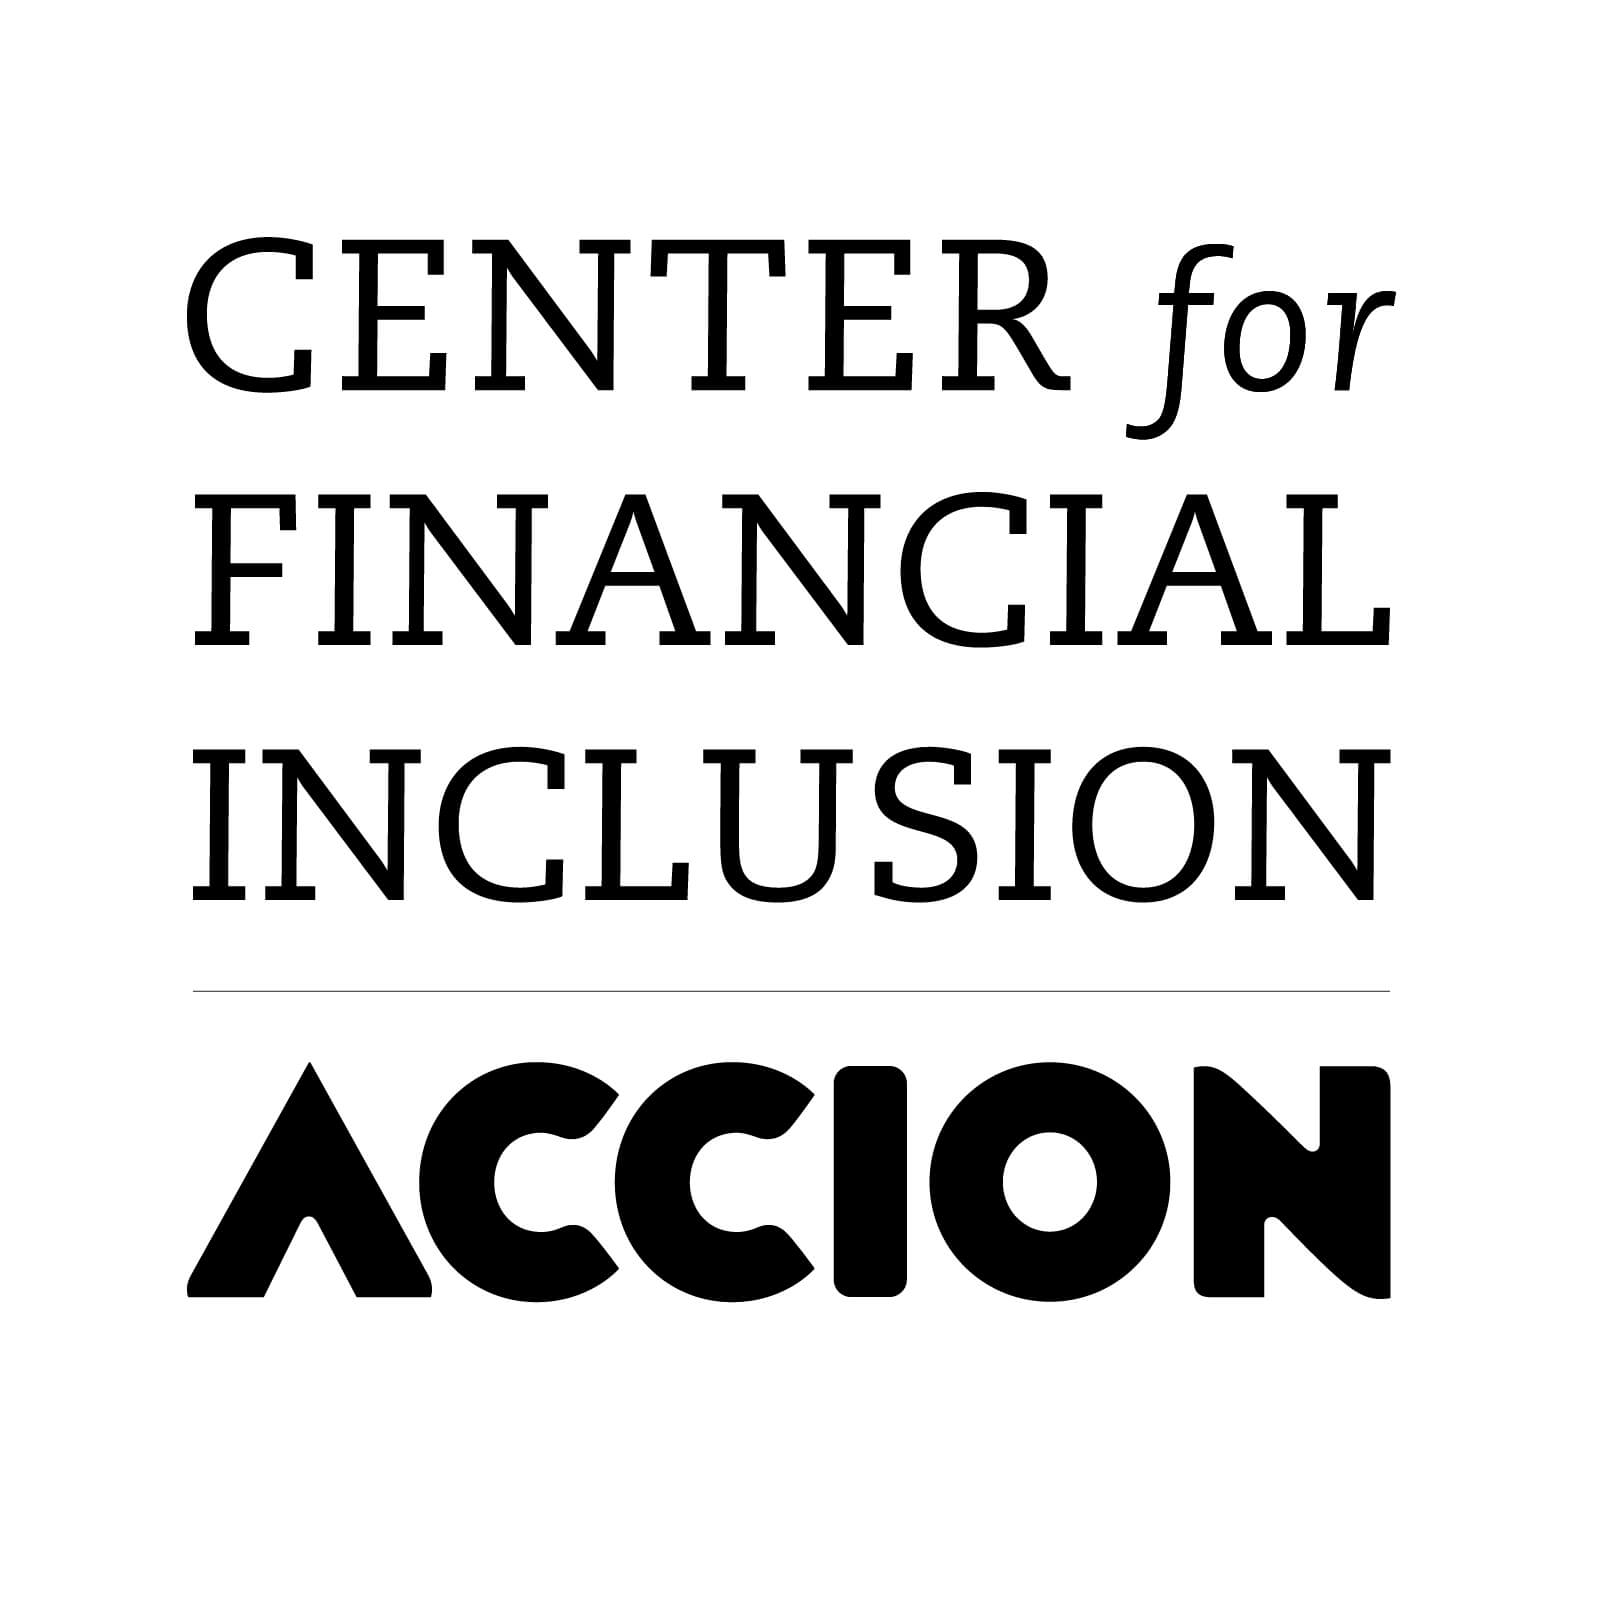 Center for Financial Inclusion